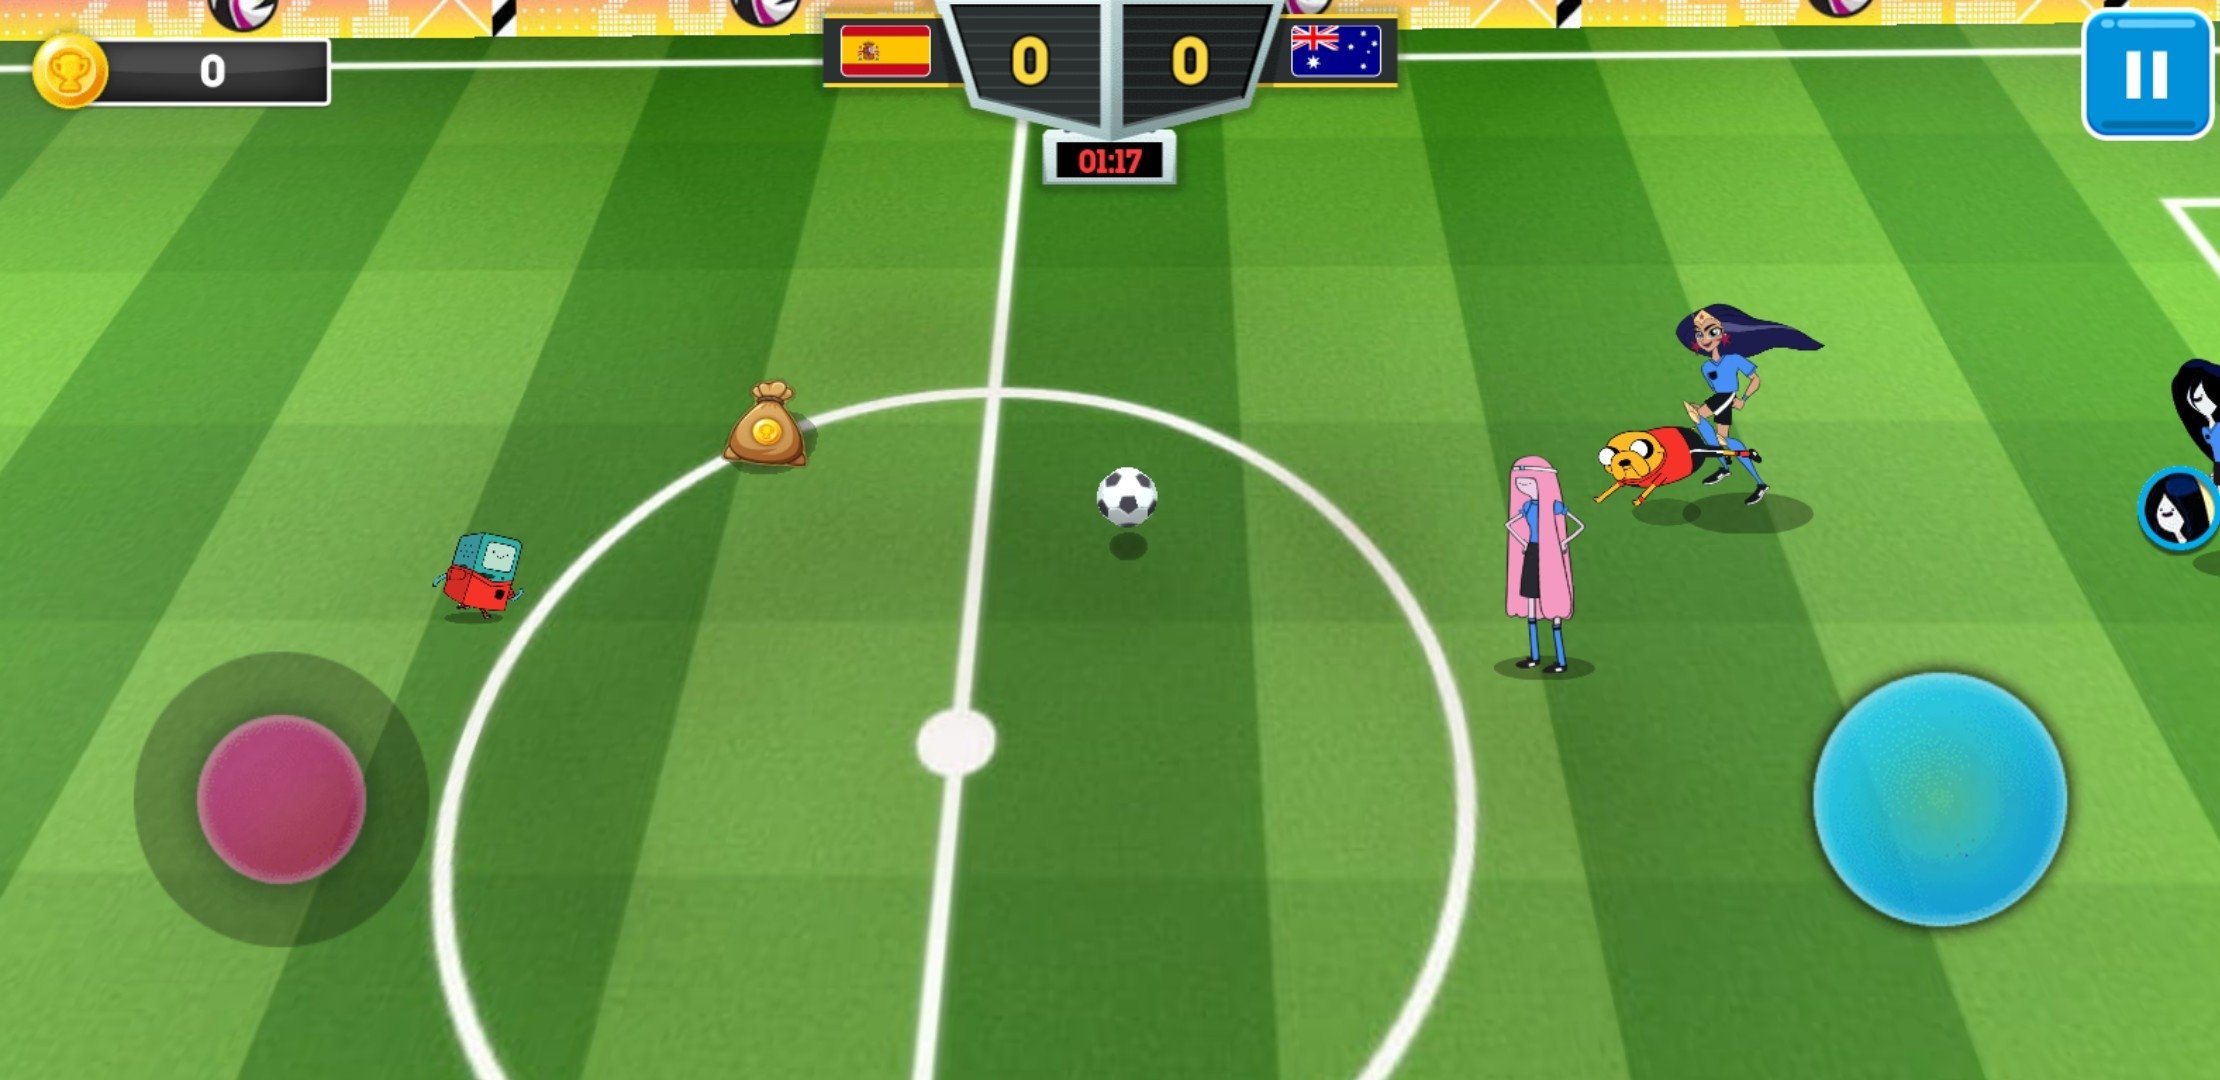 Toon Cup 2021 APK Download for Android Free